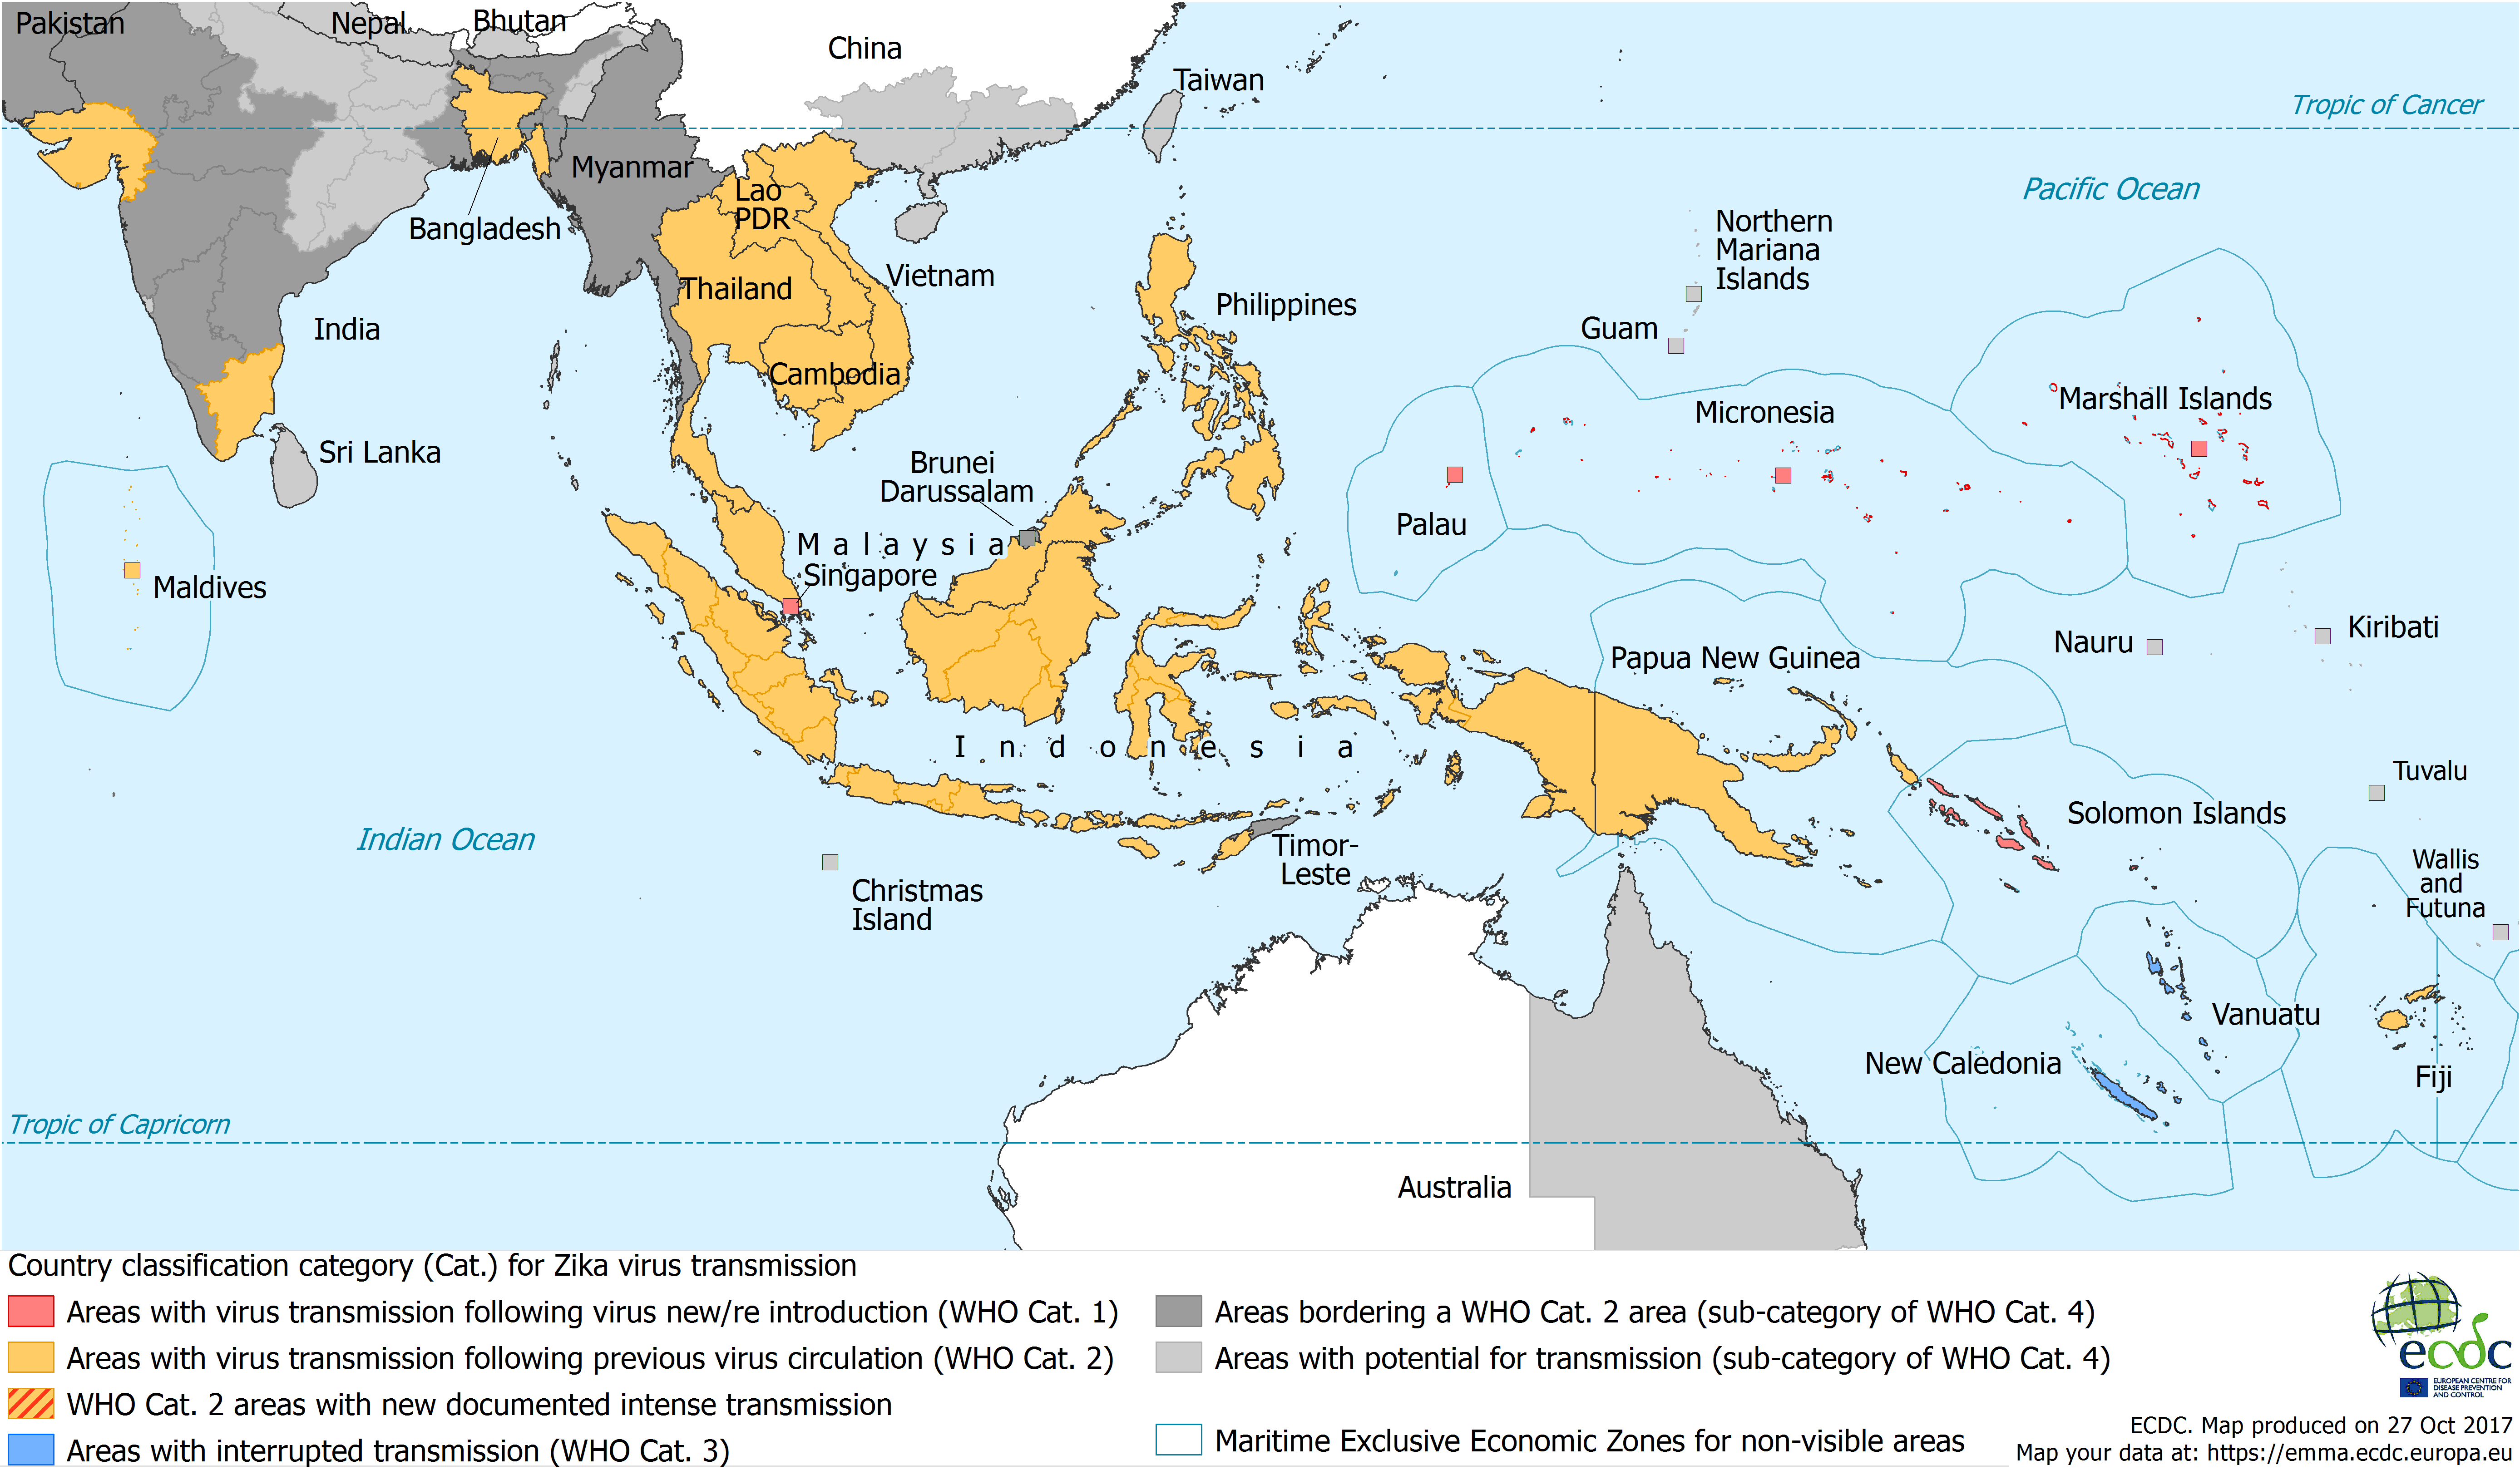 Zika transmission in South East Asia